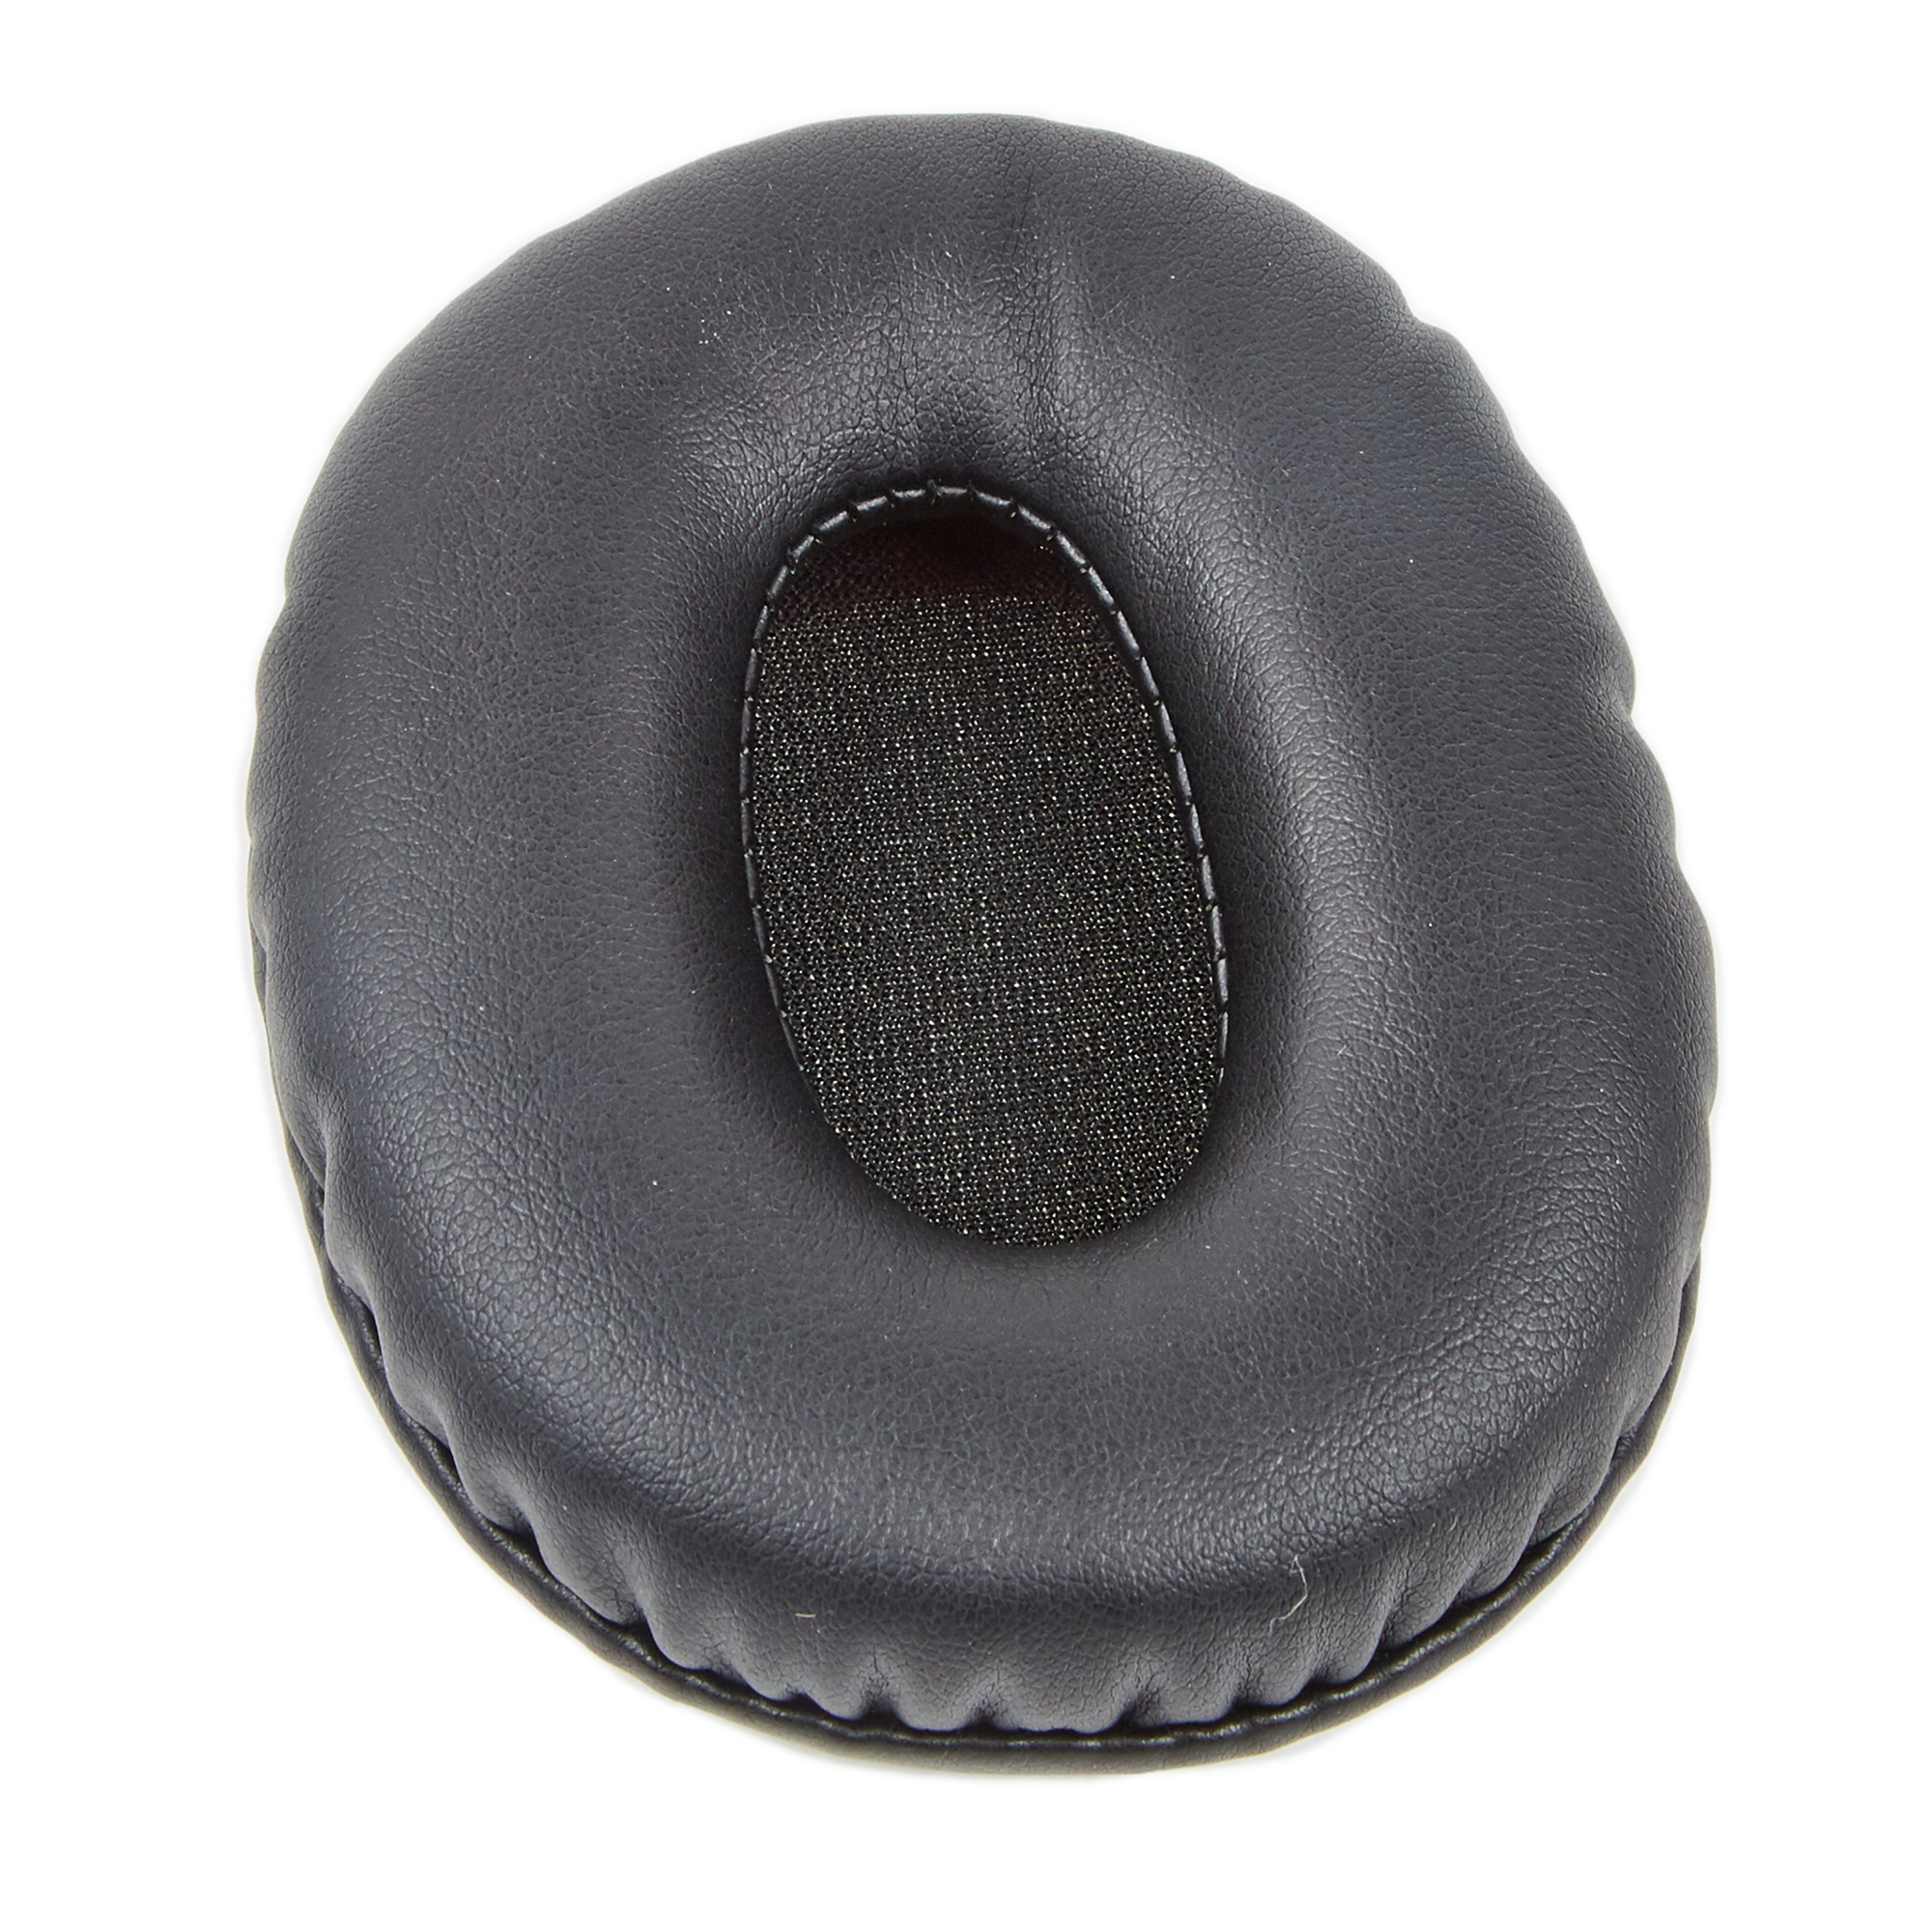 Replacement Ear Pads for Wireless Headphones-15 Pairs